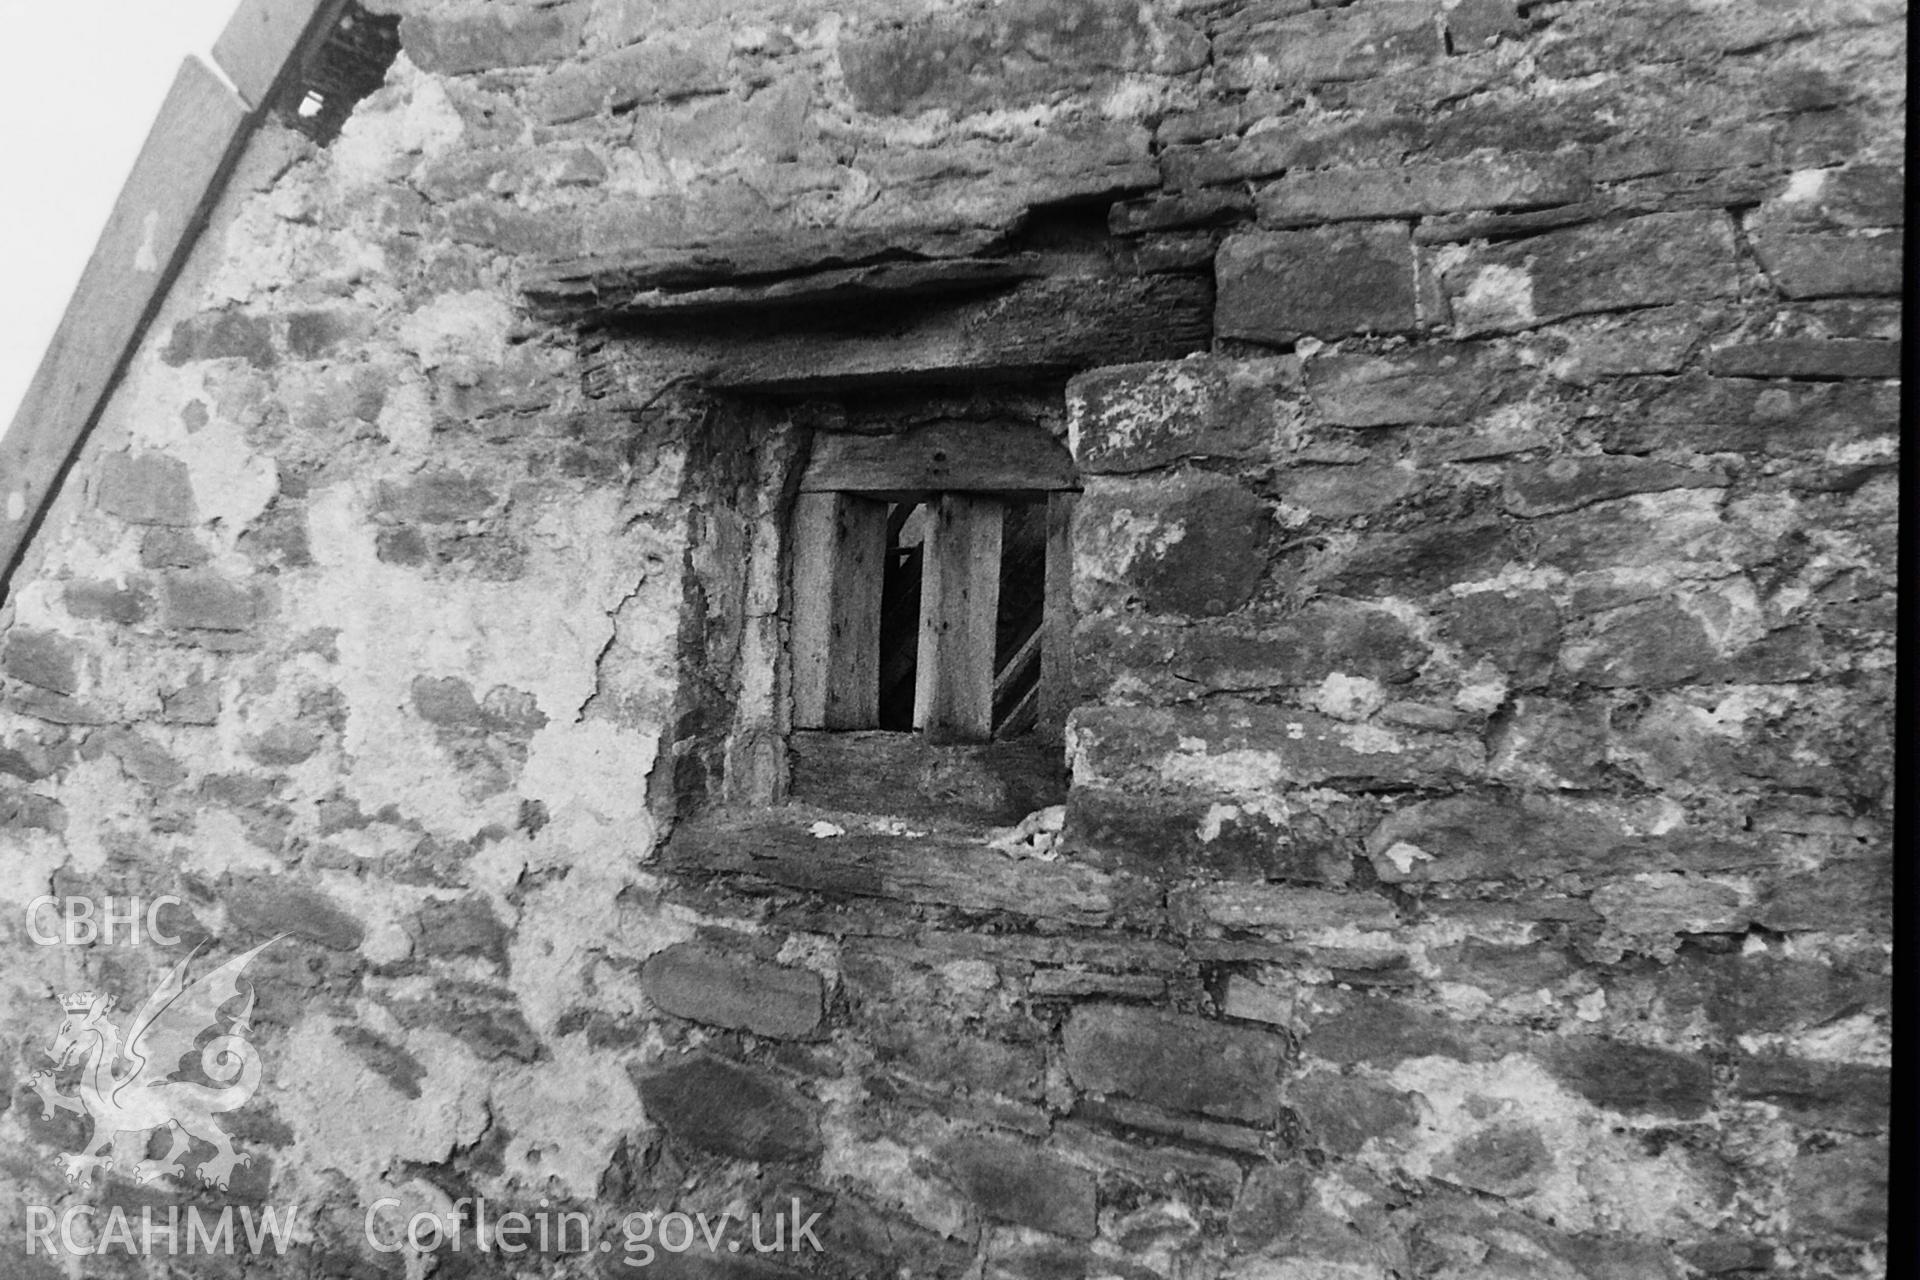 Black and white photo showing the first floor window in the gable end of Cil-lonydd, taken by Paul R. Davis, 2000.